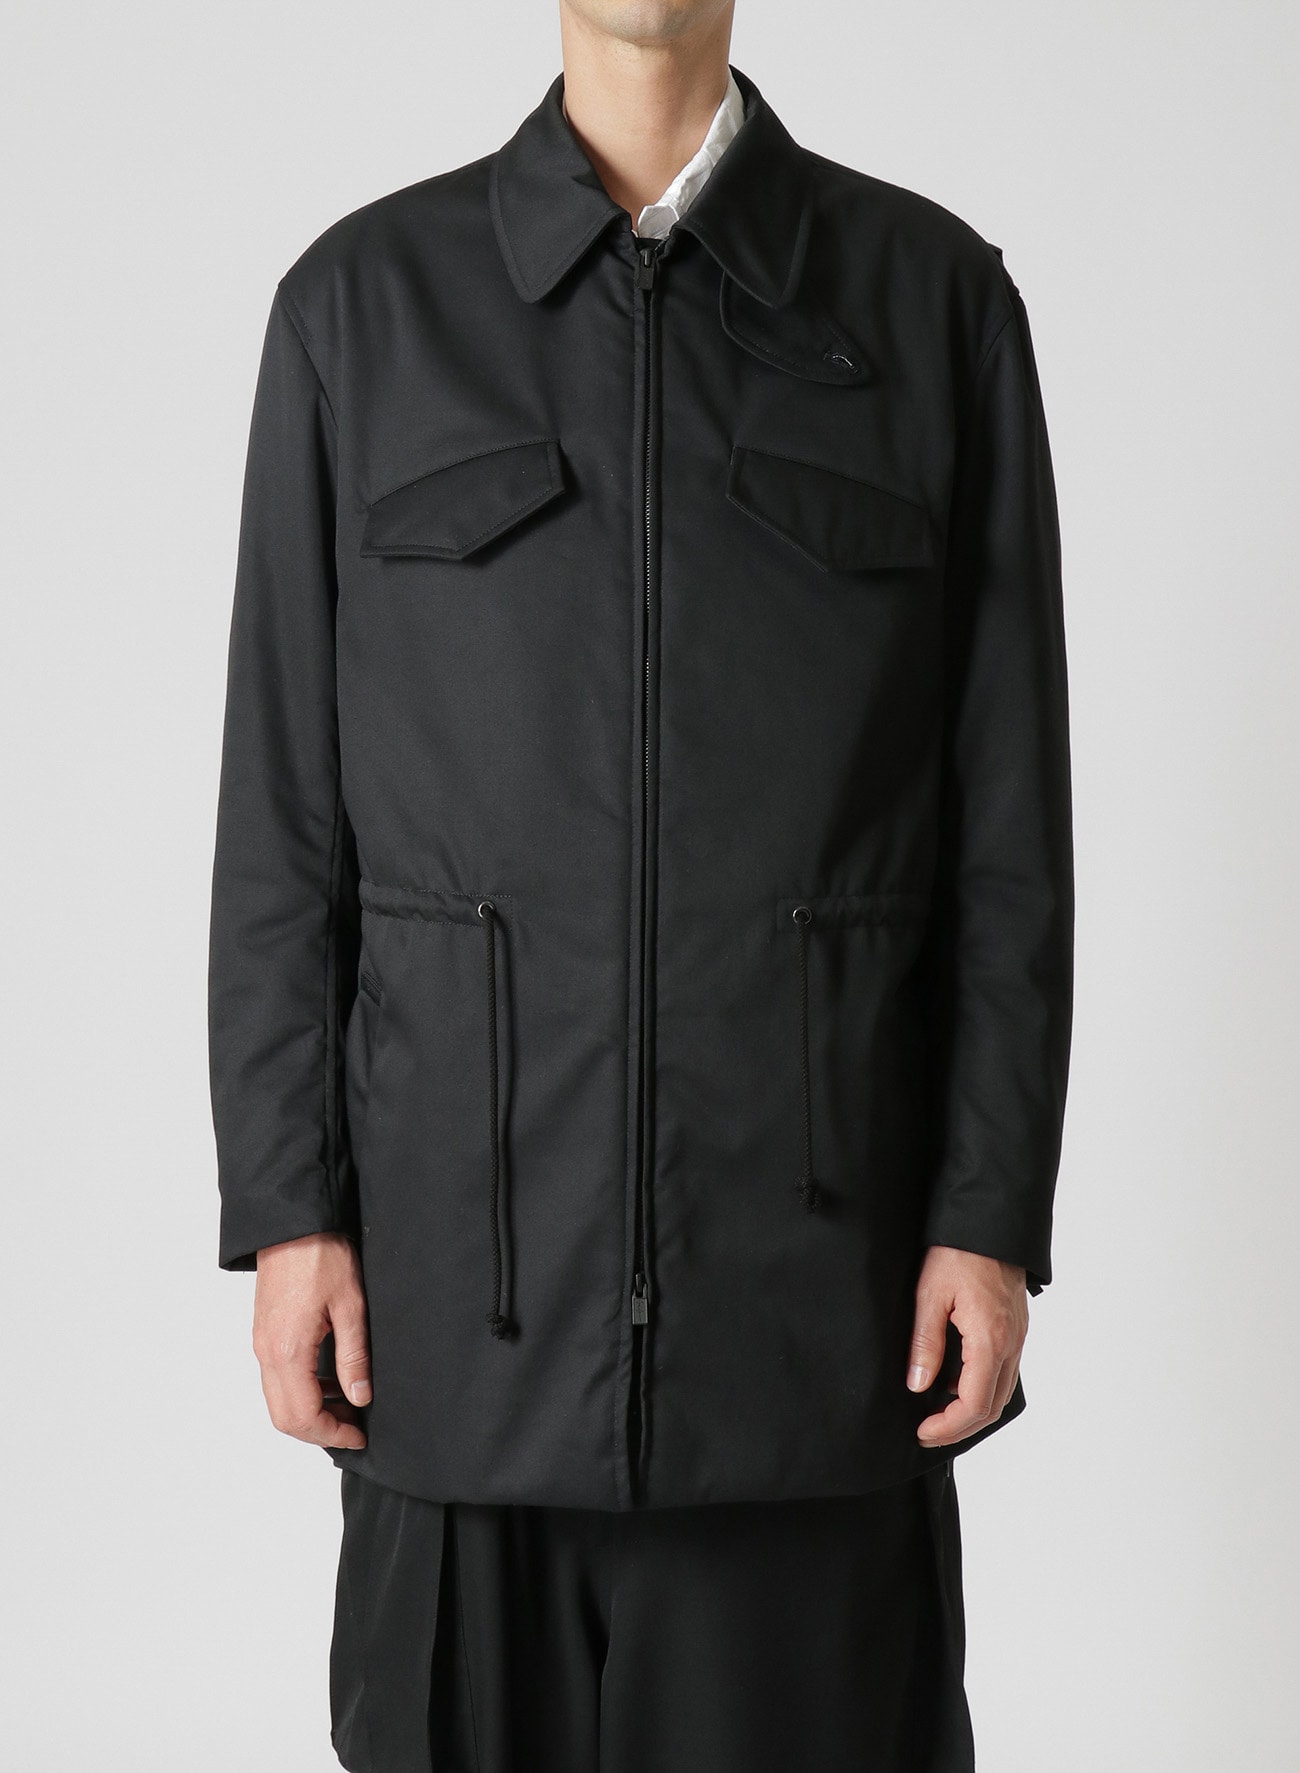 T/C TWILL R-THINSULATE STRING BLOUSON(S Black): Vintage 1.2｜THE